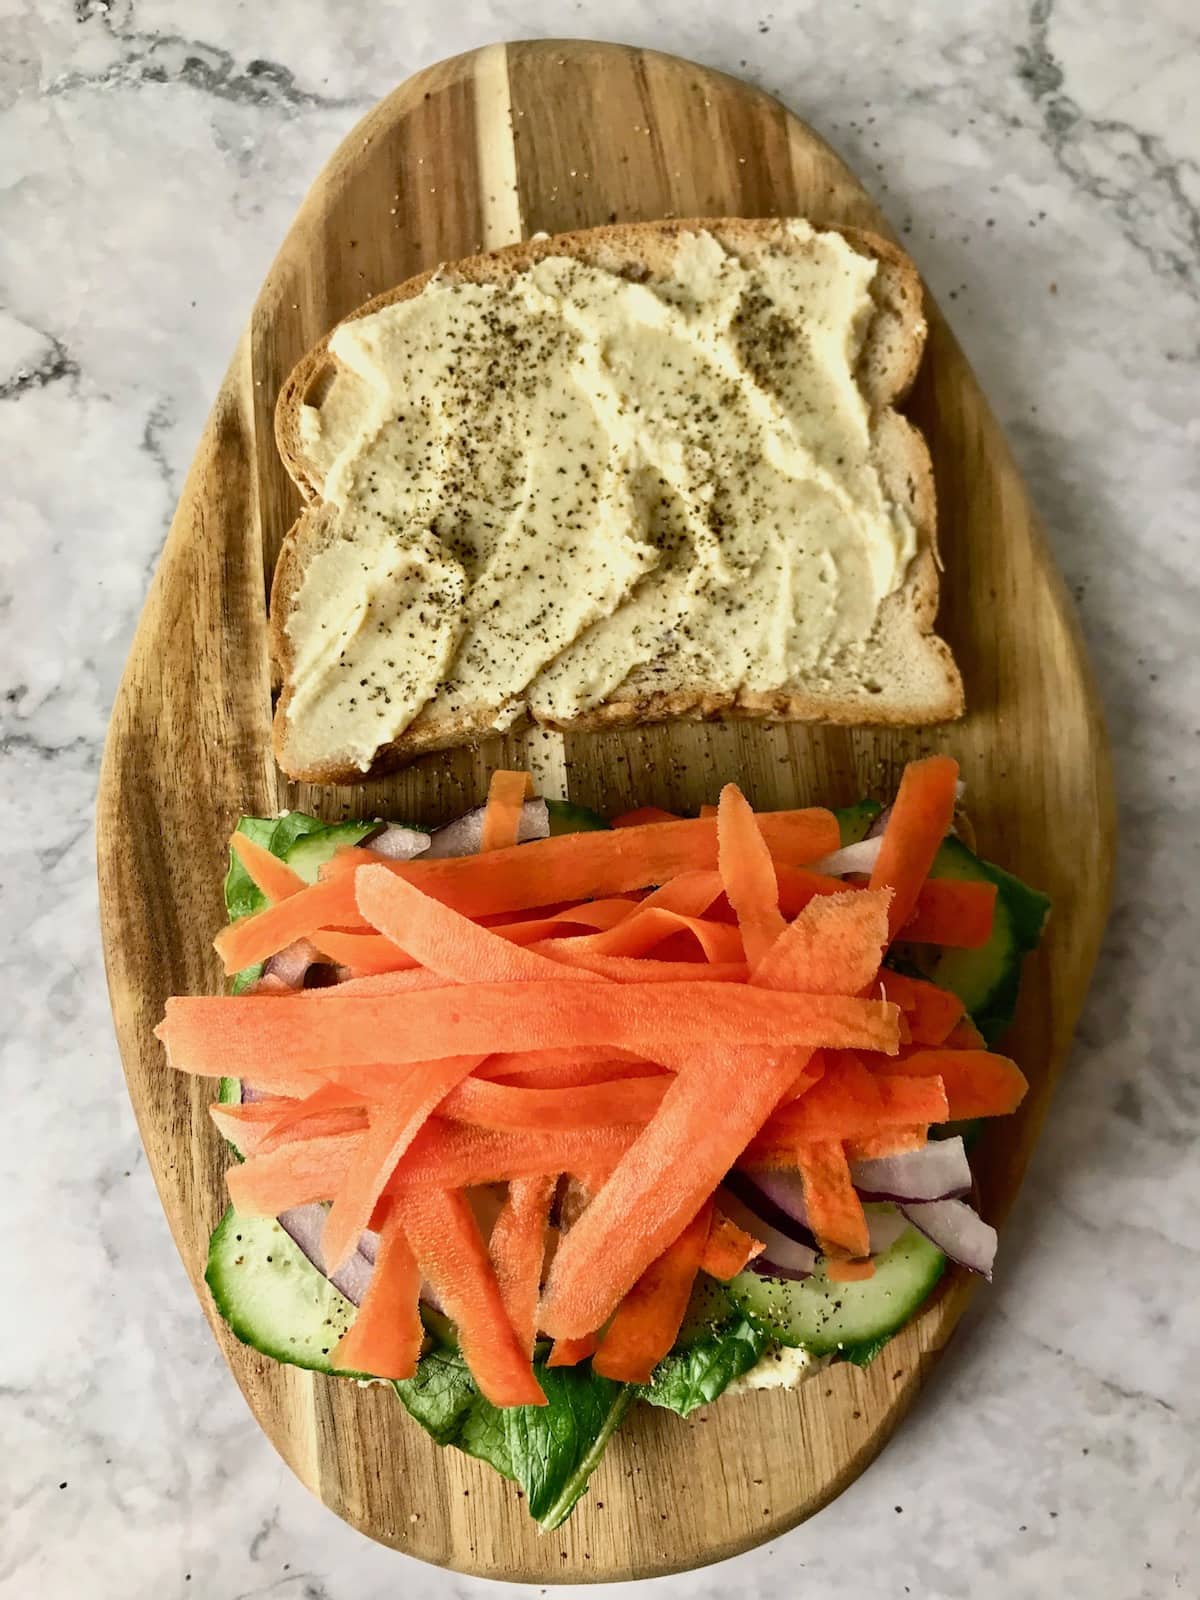 Two slices of bread, one topped with hummus, the other with various veggies including carrots on top.